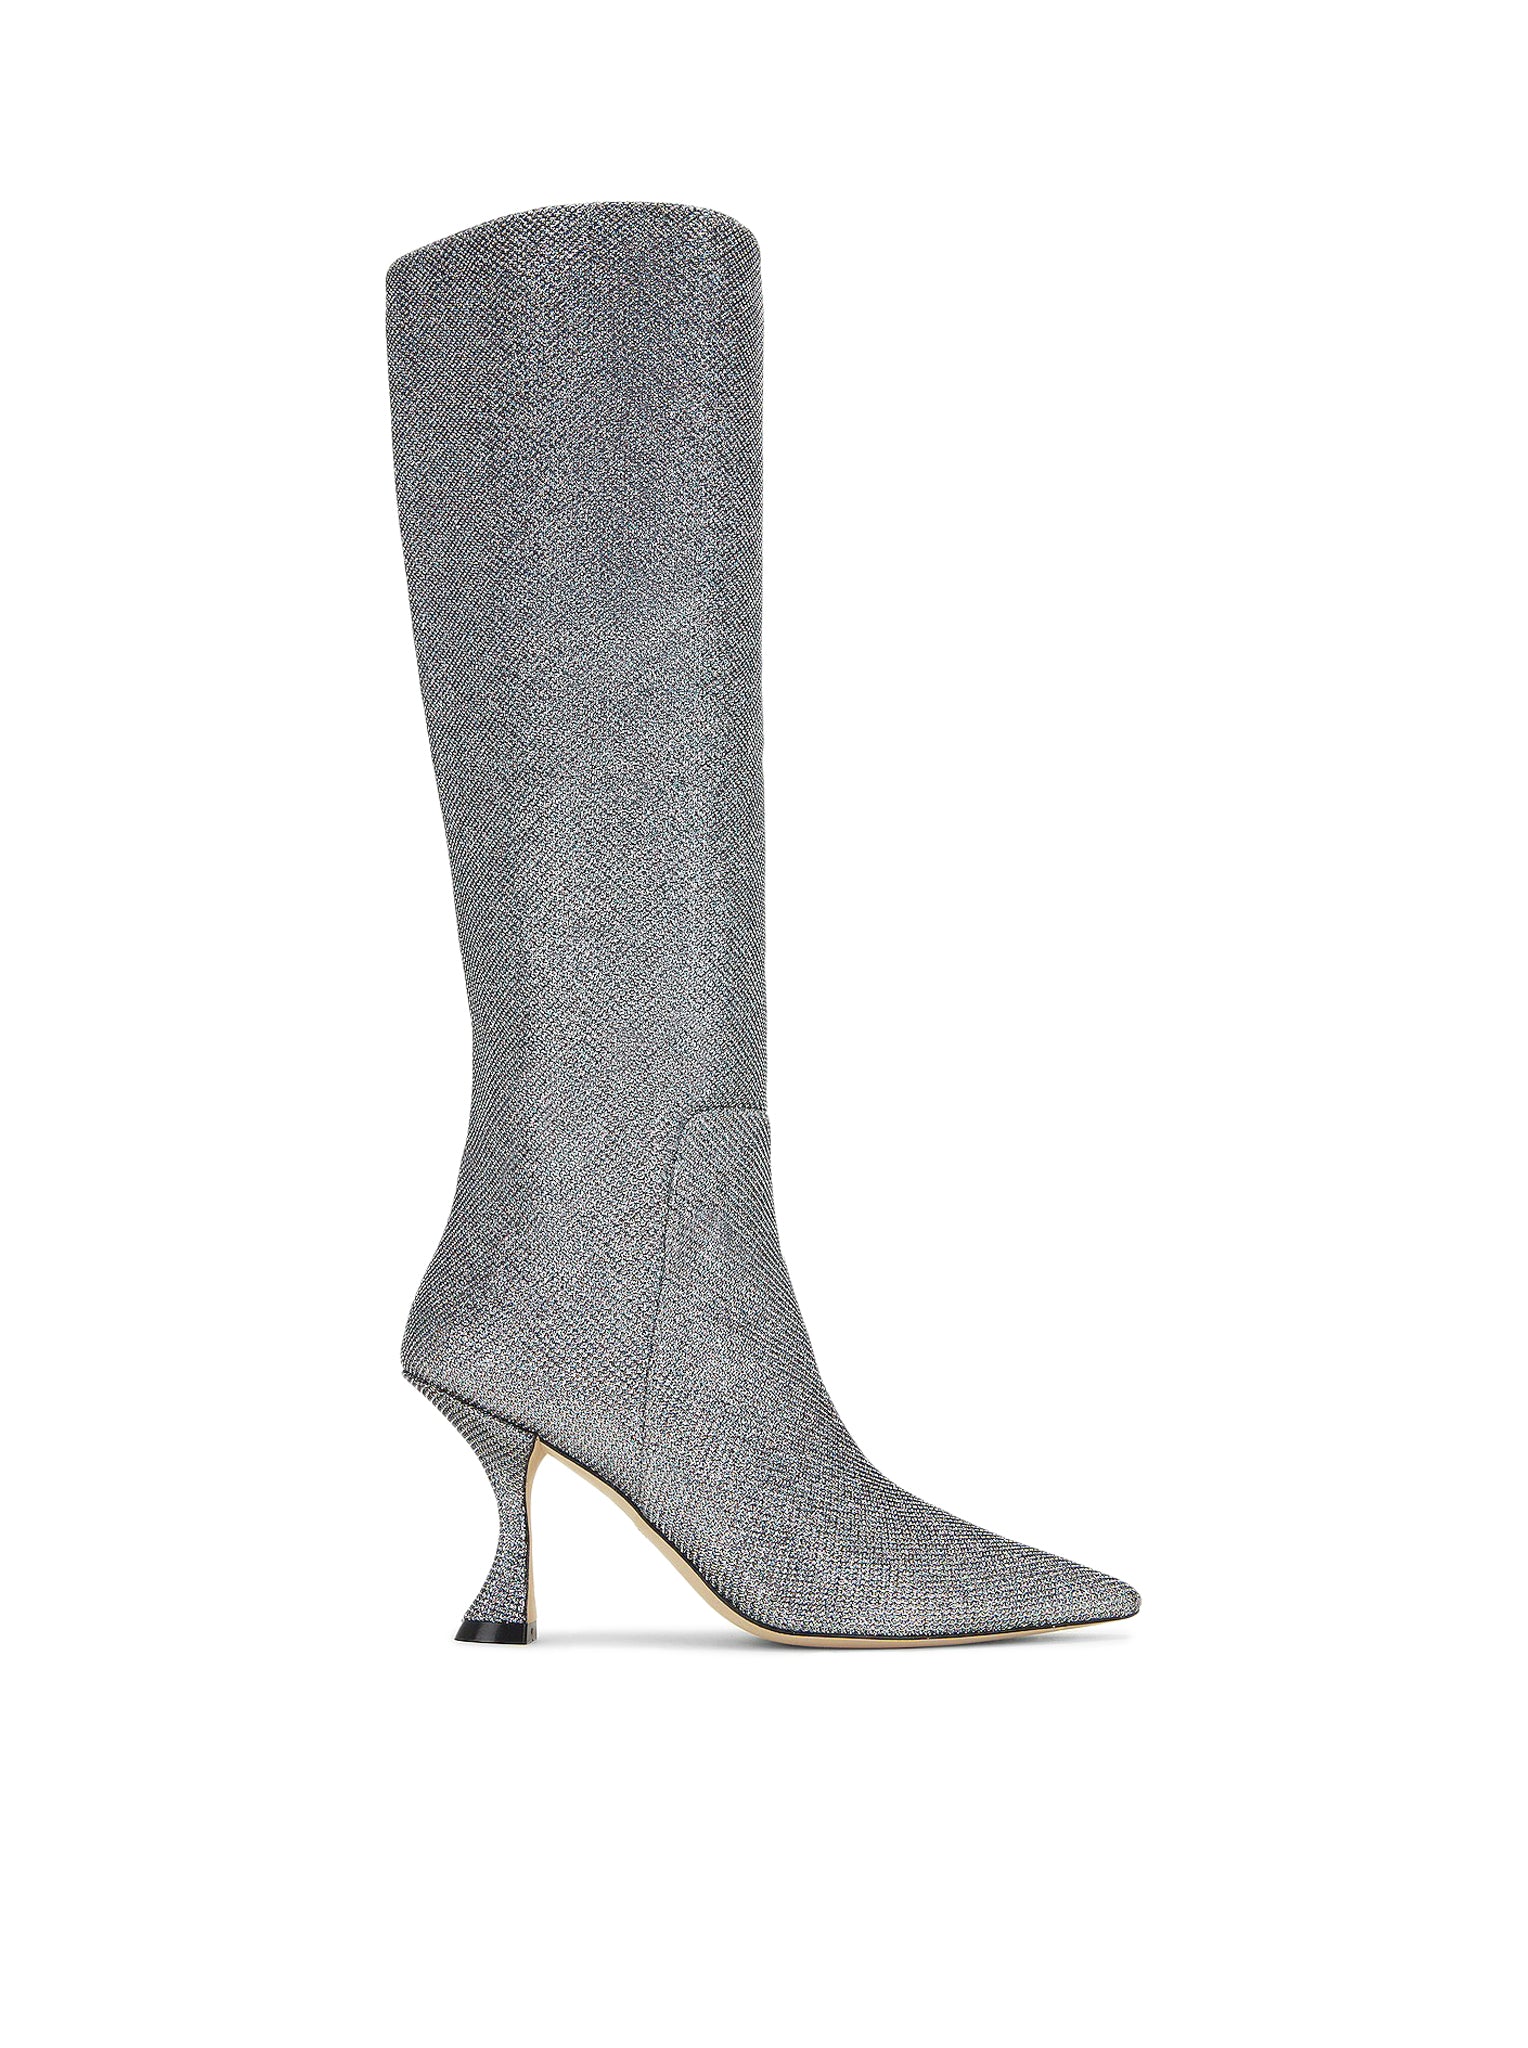 XCURVE 85 SLOUCH BOOT